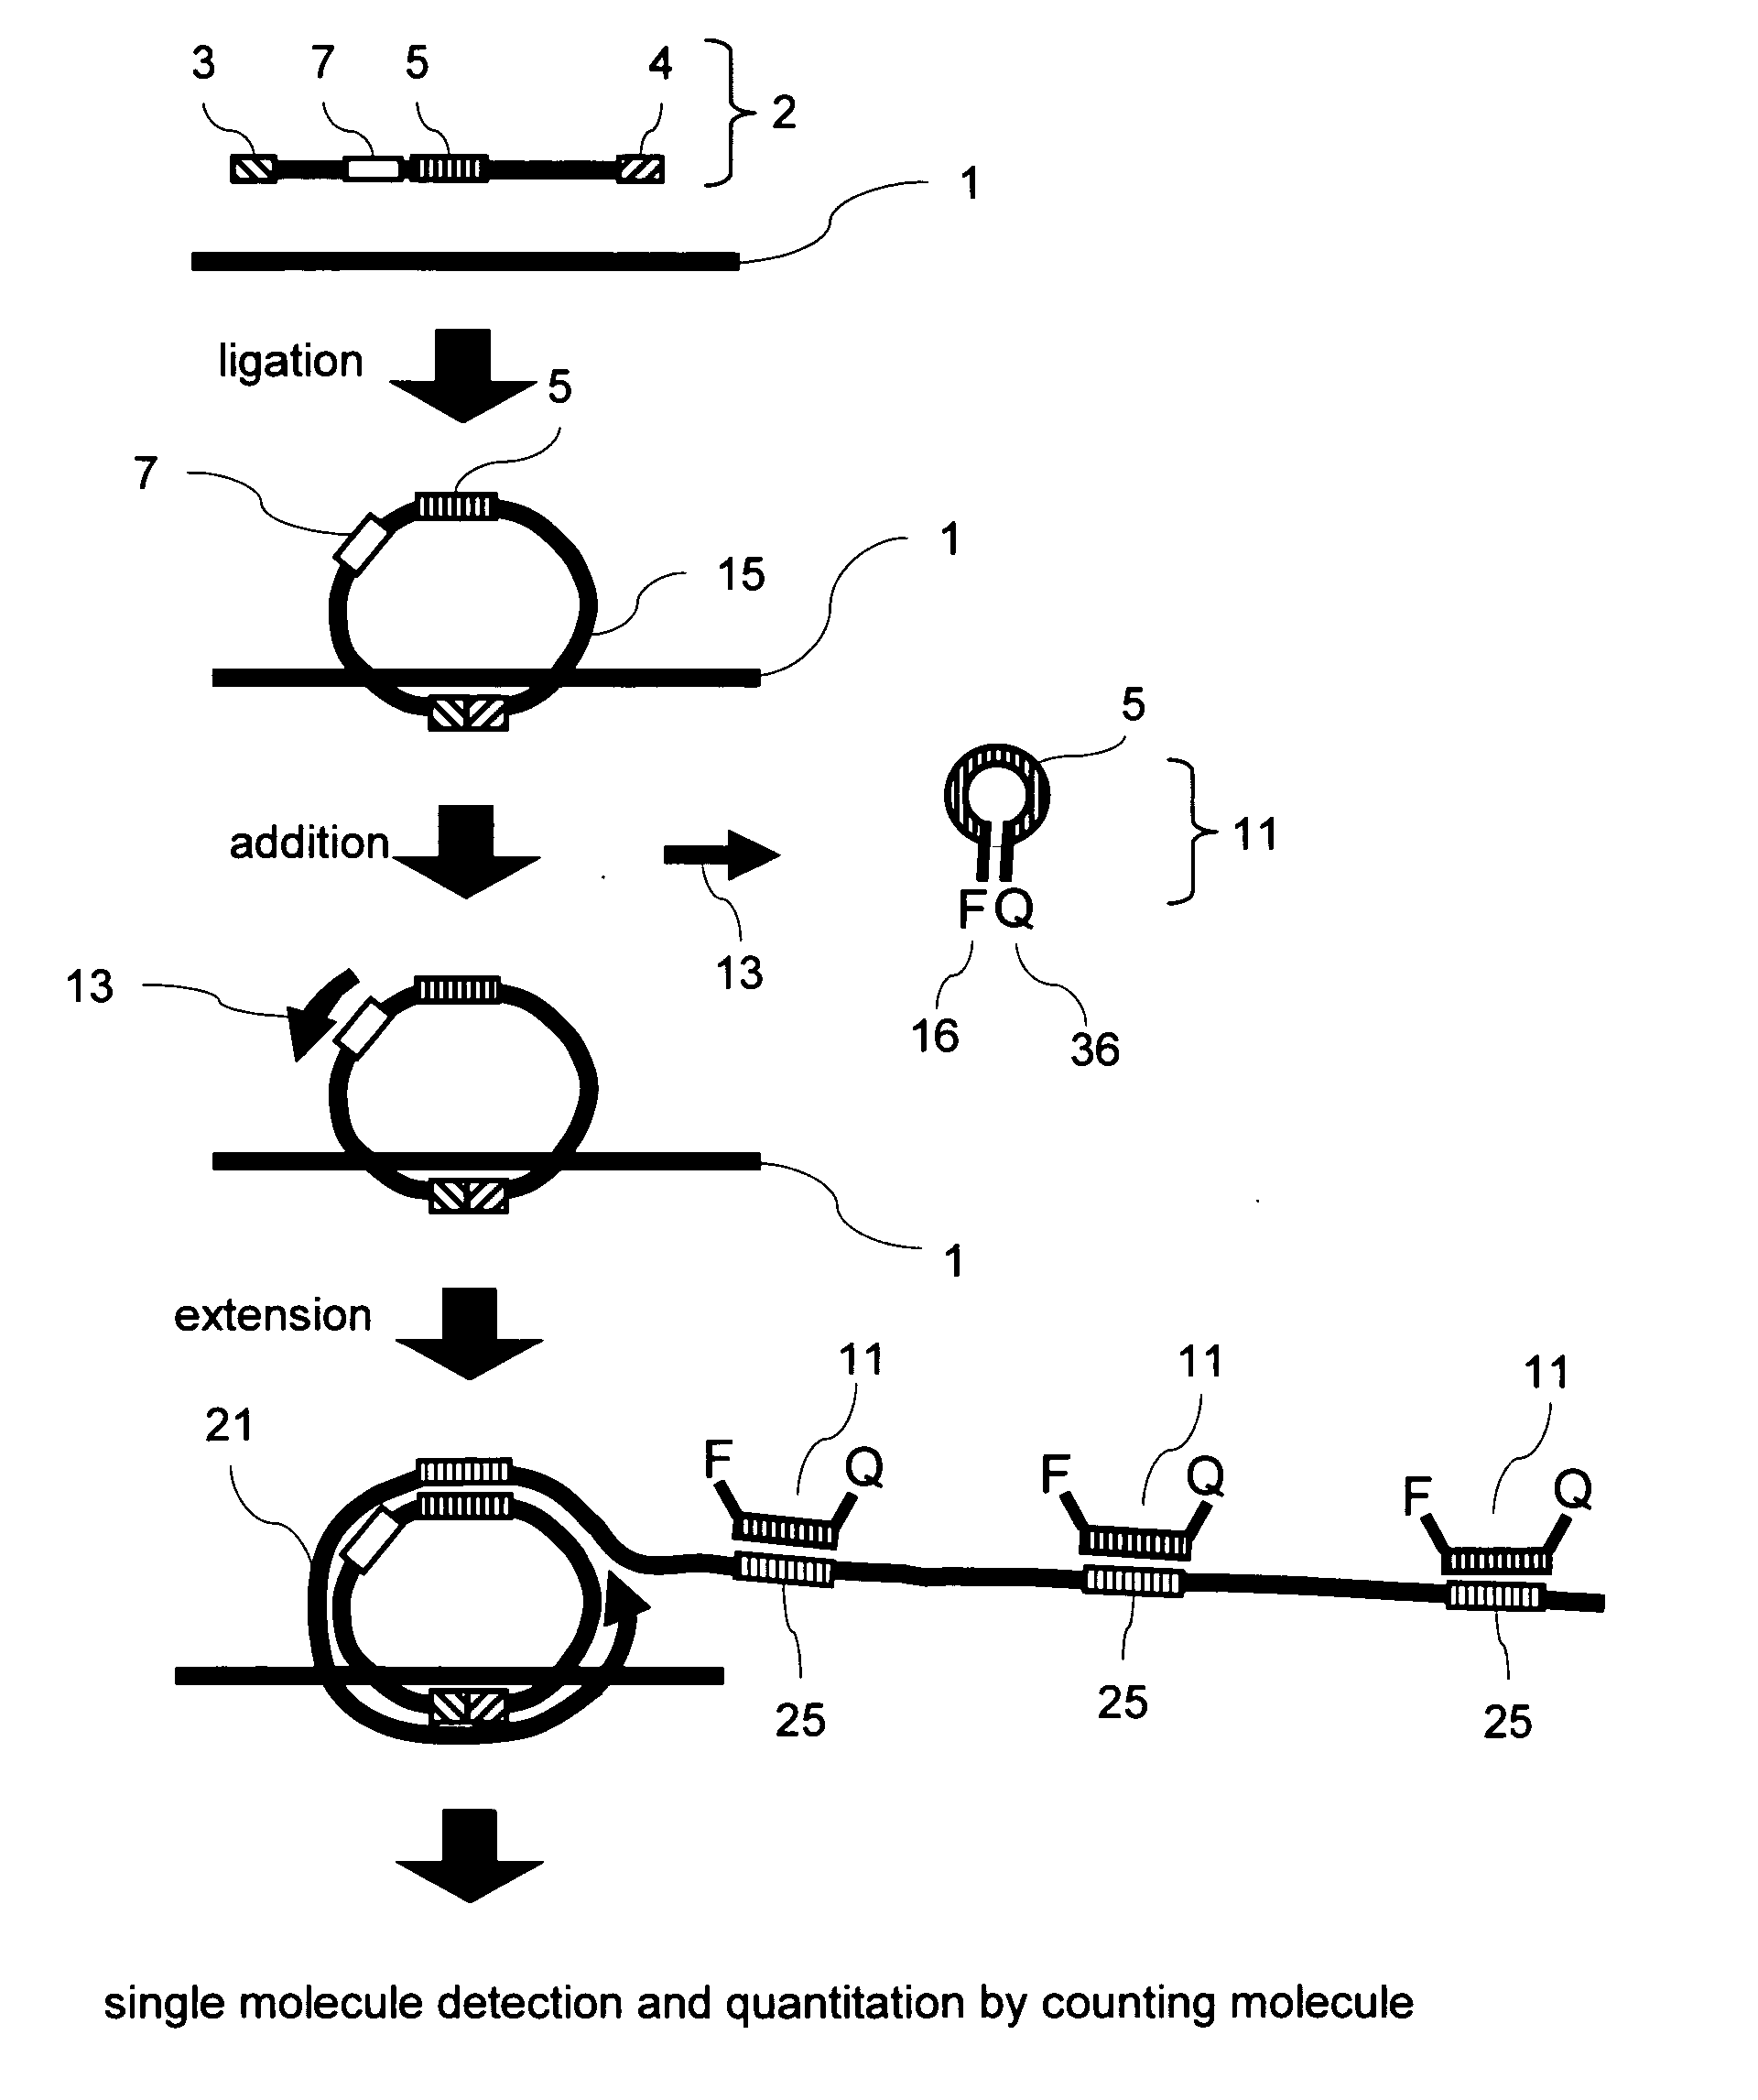 Methods of nucleic acid analysis by single molecule detection